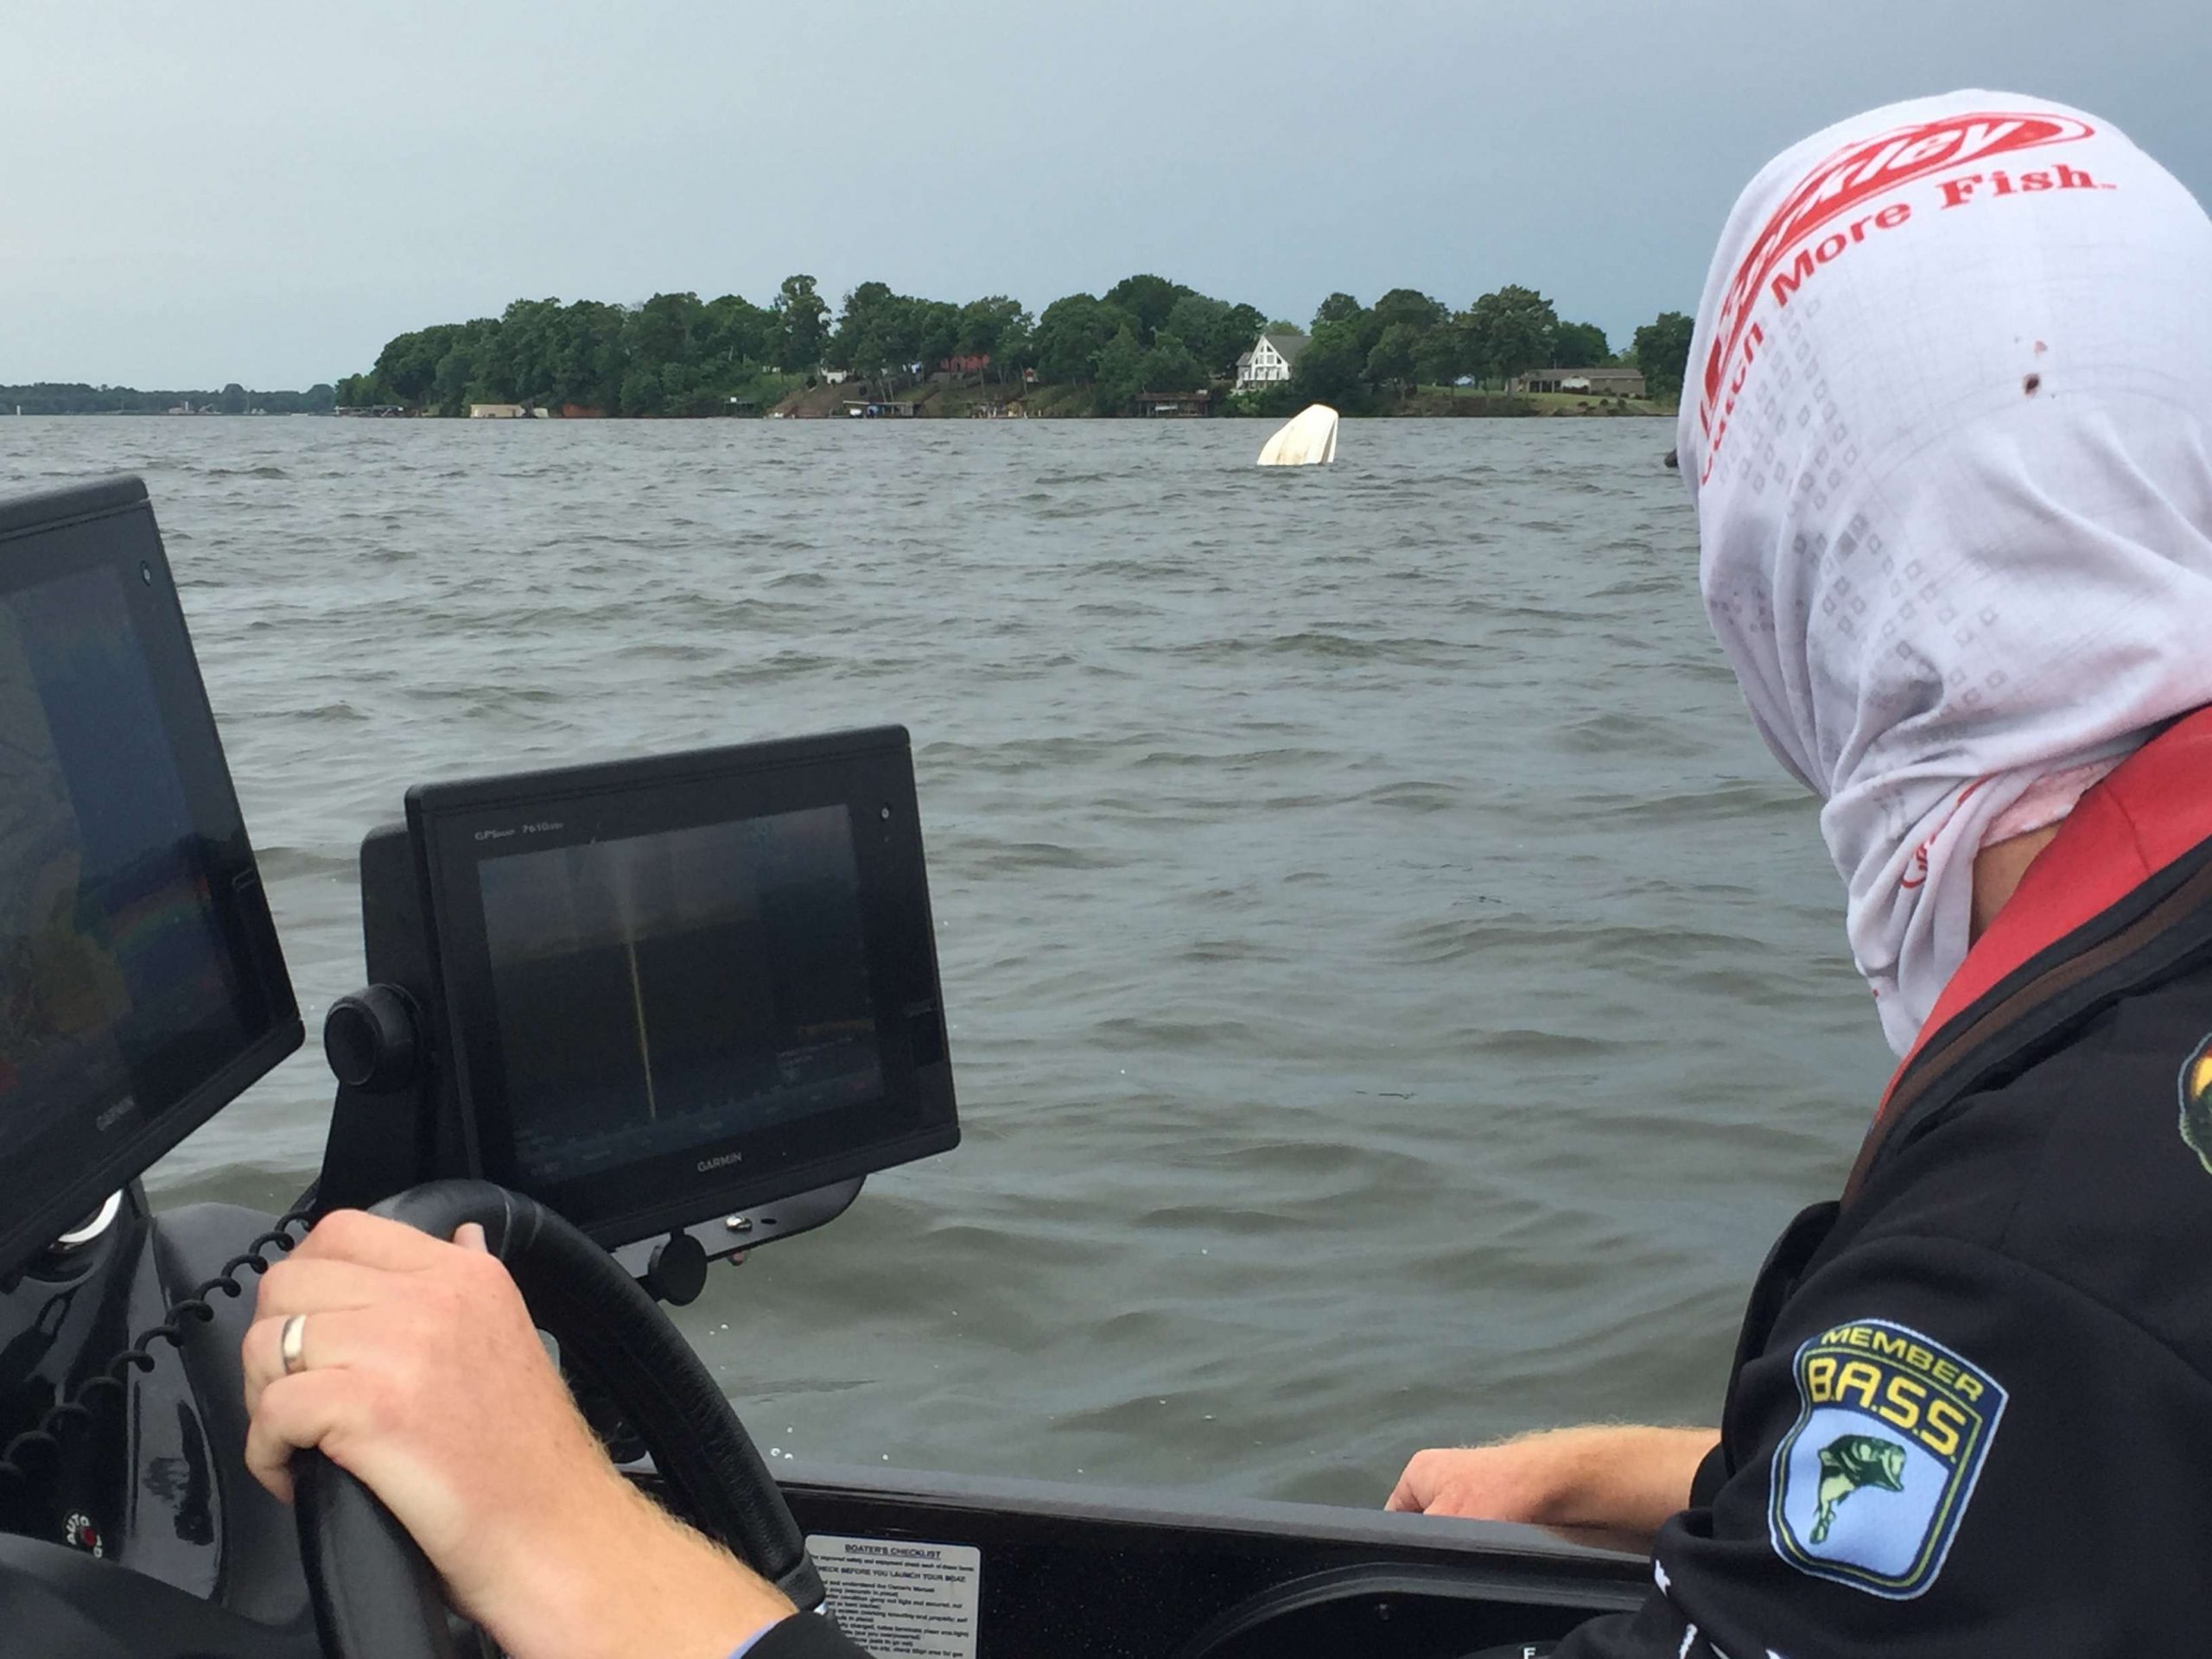 Sometimes the anglers do point out crazy stuff, like Josh Bertrand slowing down here to check on a boat that capsized at Wheeler Lake. Matt Lee rescued the two men, but other pros reported looking to see if they could help, and Marshal Joe McElroy got a shot of the sinking vessel. 